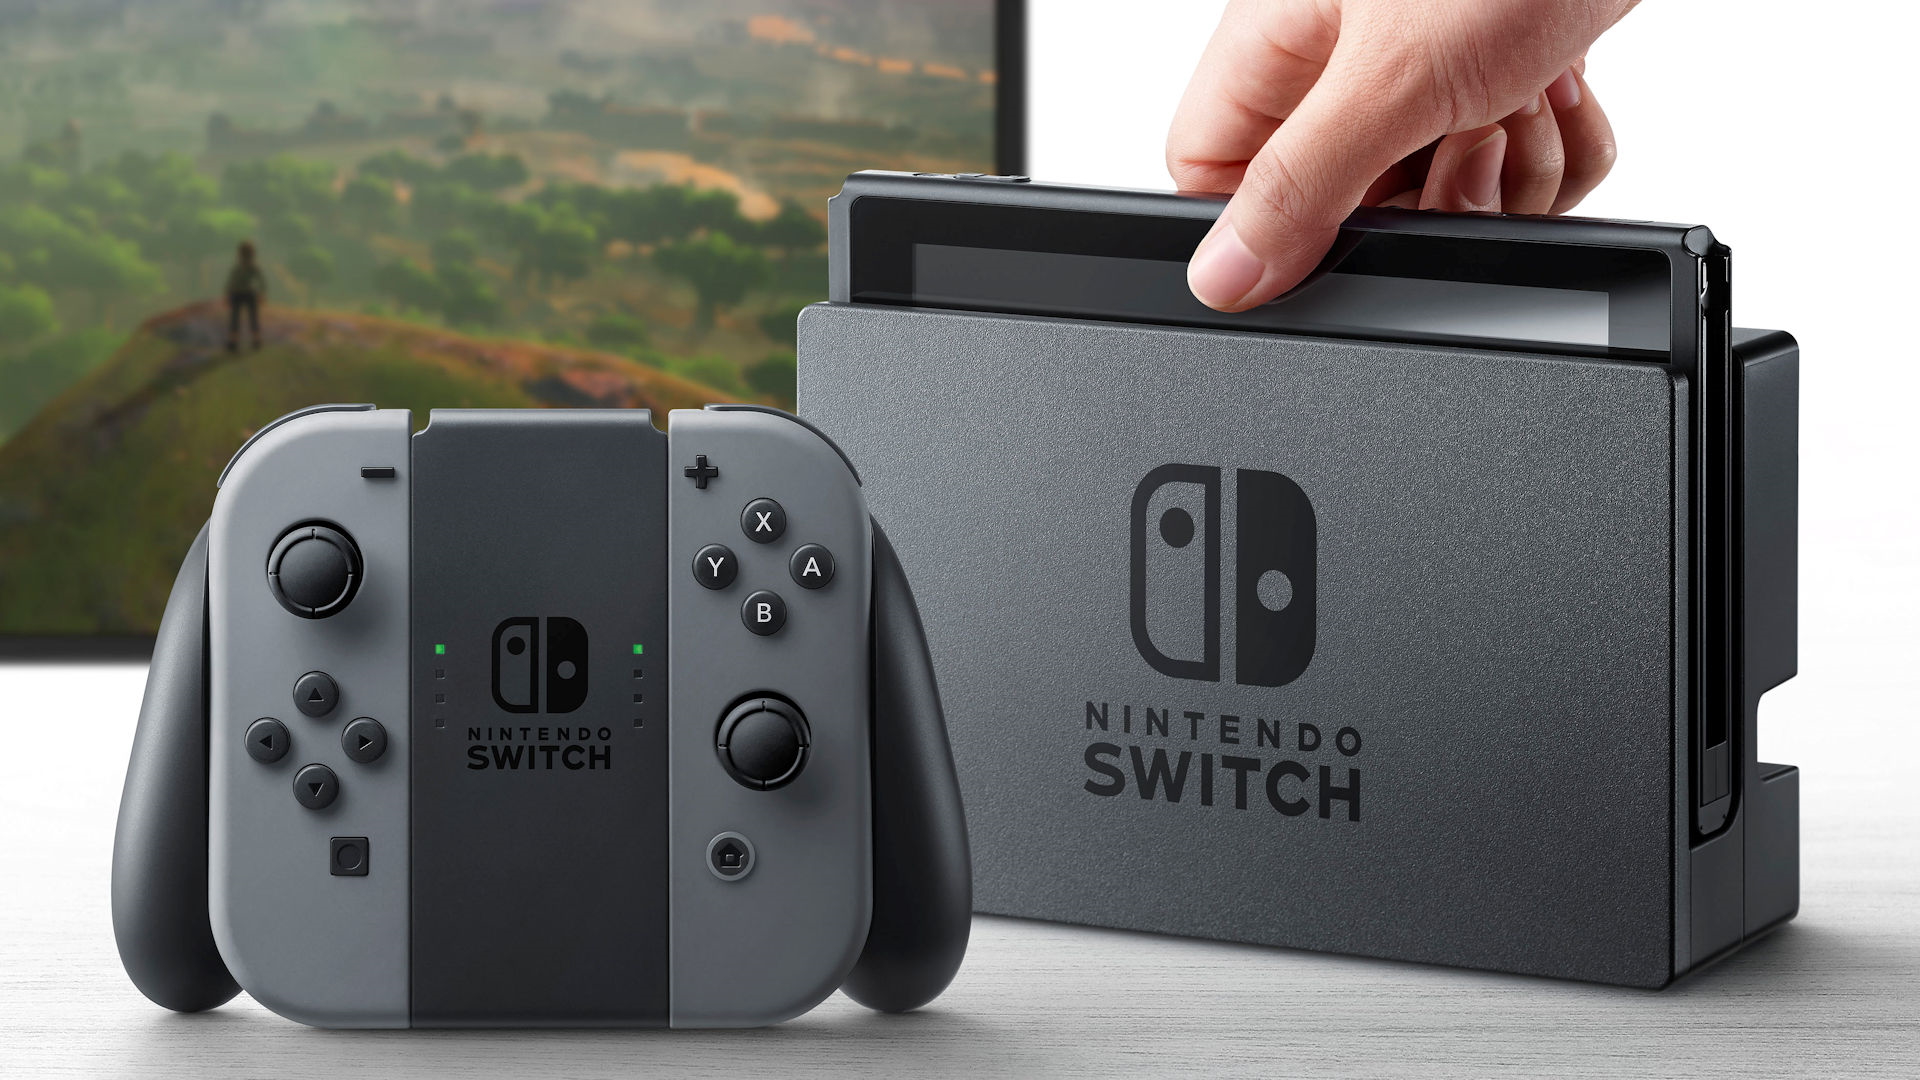 You can now buy an official Nintendo Switch Dock for just US$39.99 -   News